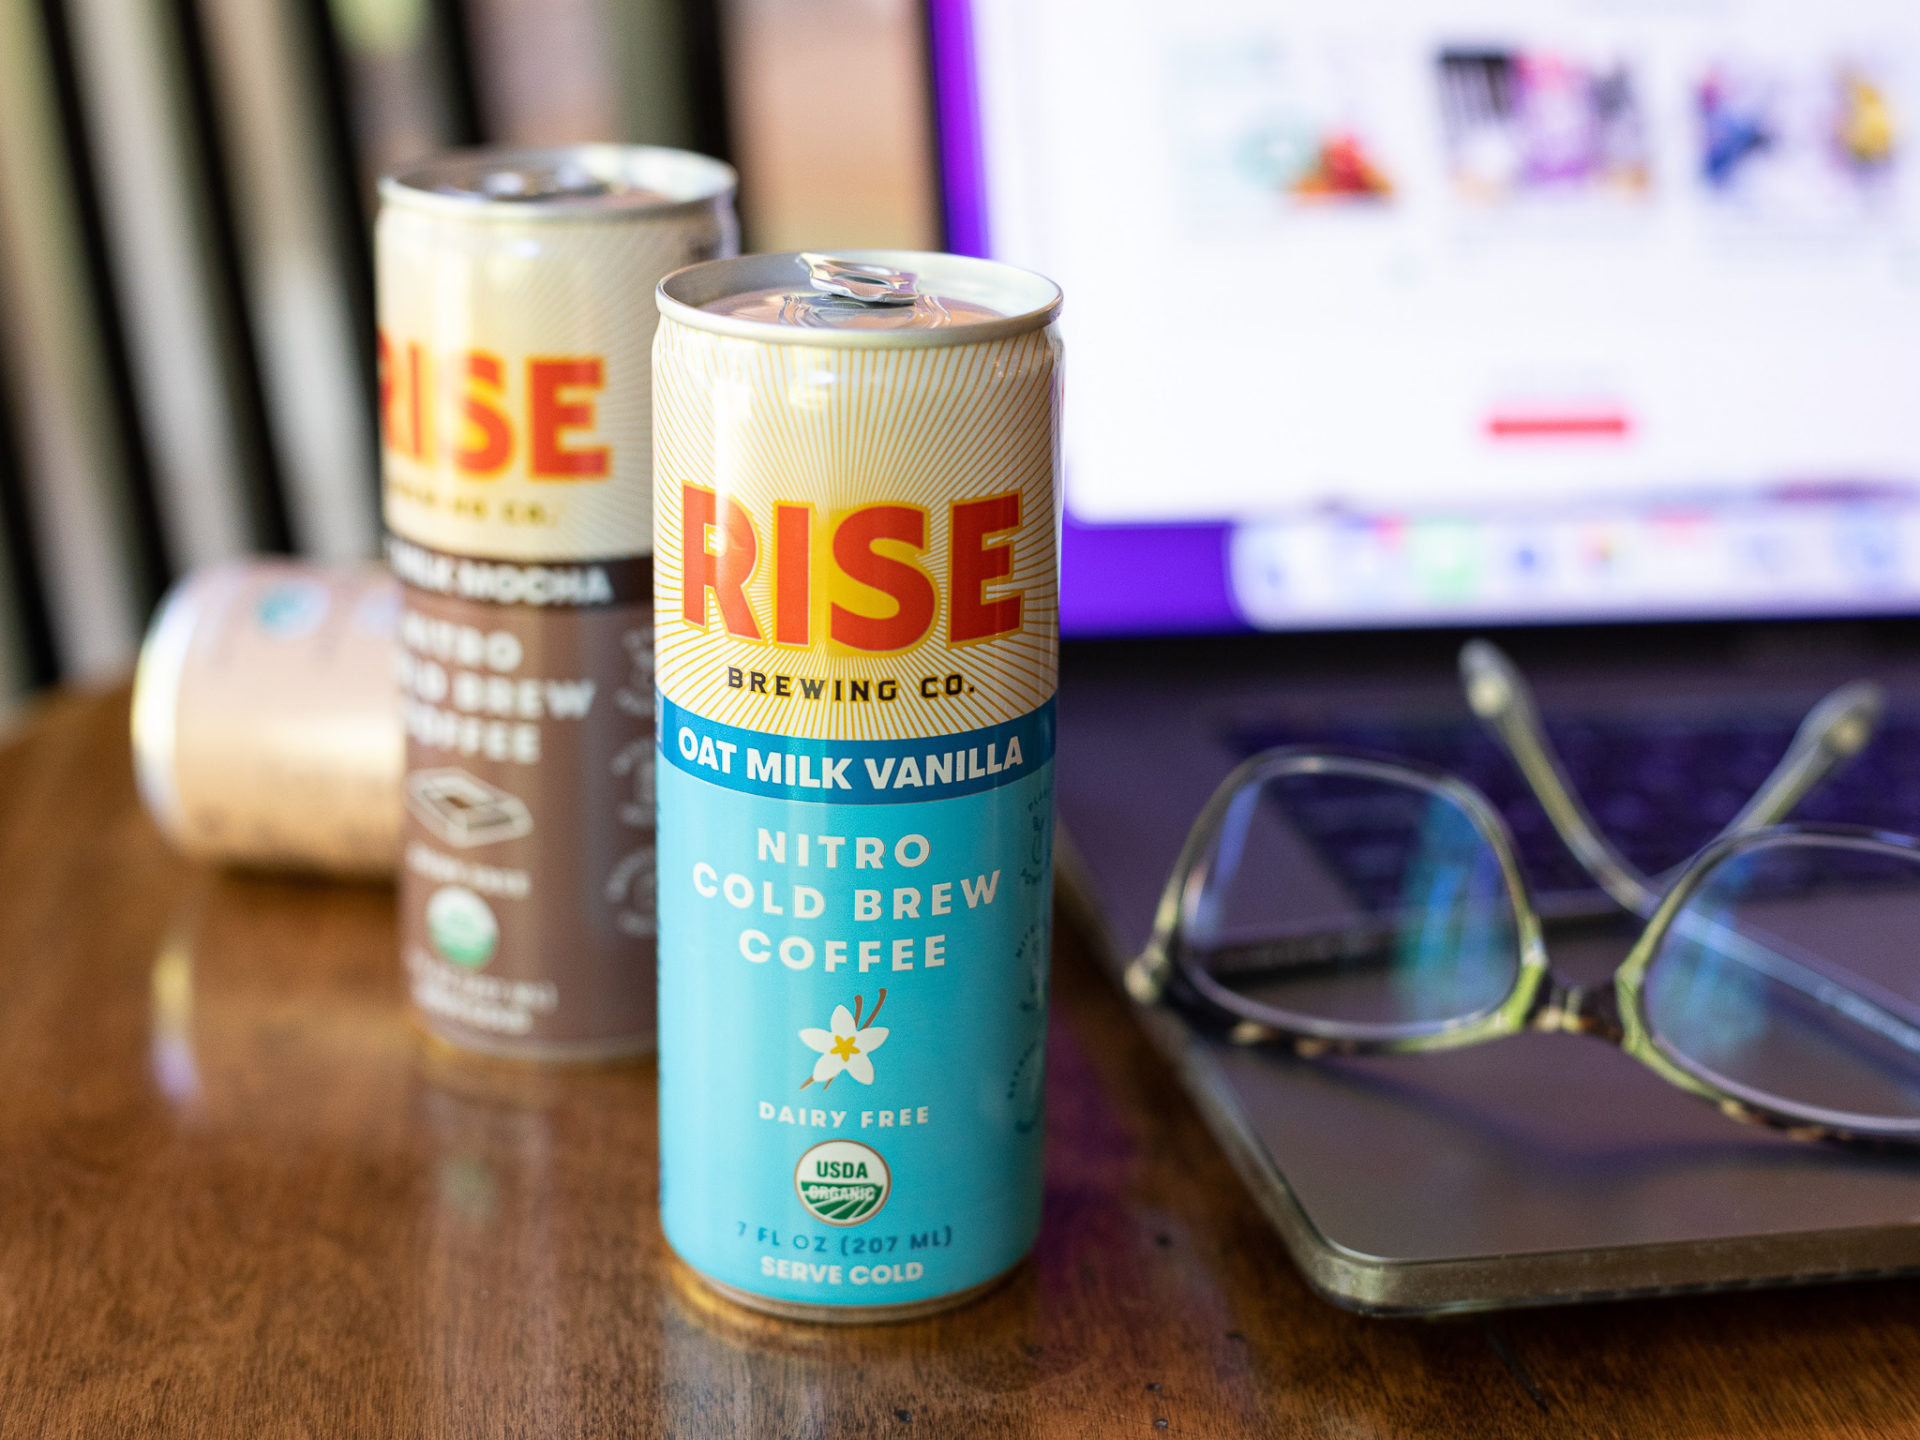 Rise Nitro Cold Brew Coffee Just $1.02 Per Can At Kroger (Regular Price $3.29)